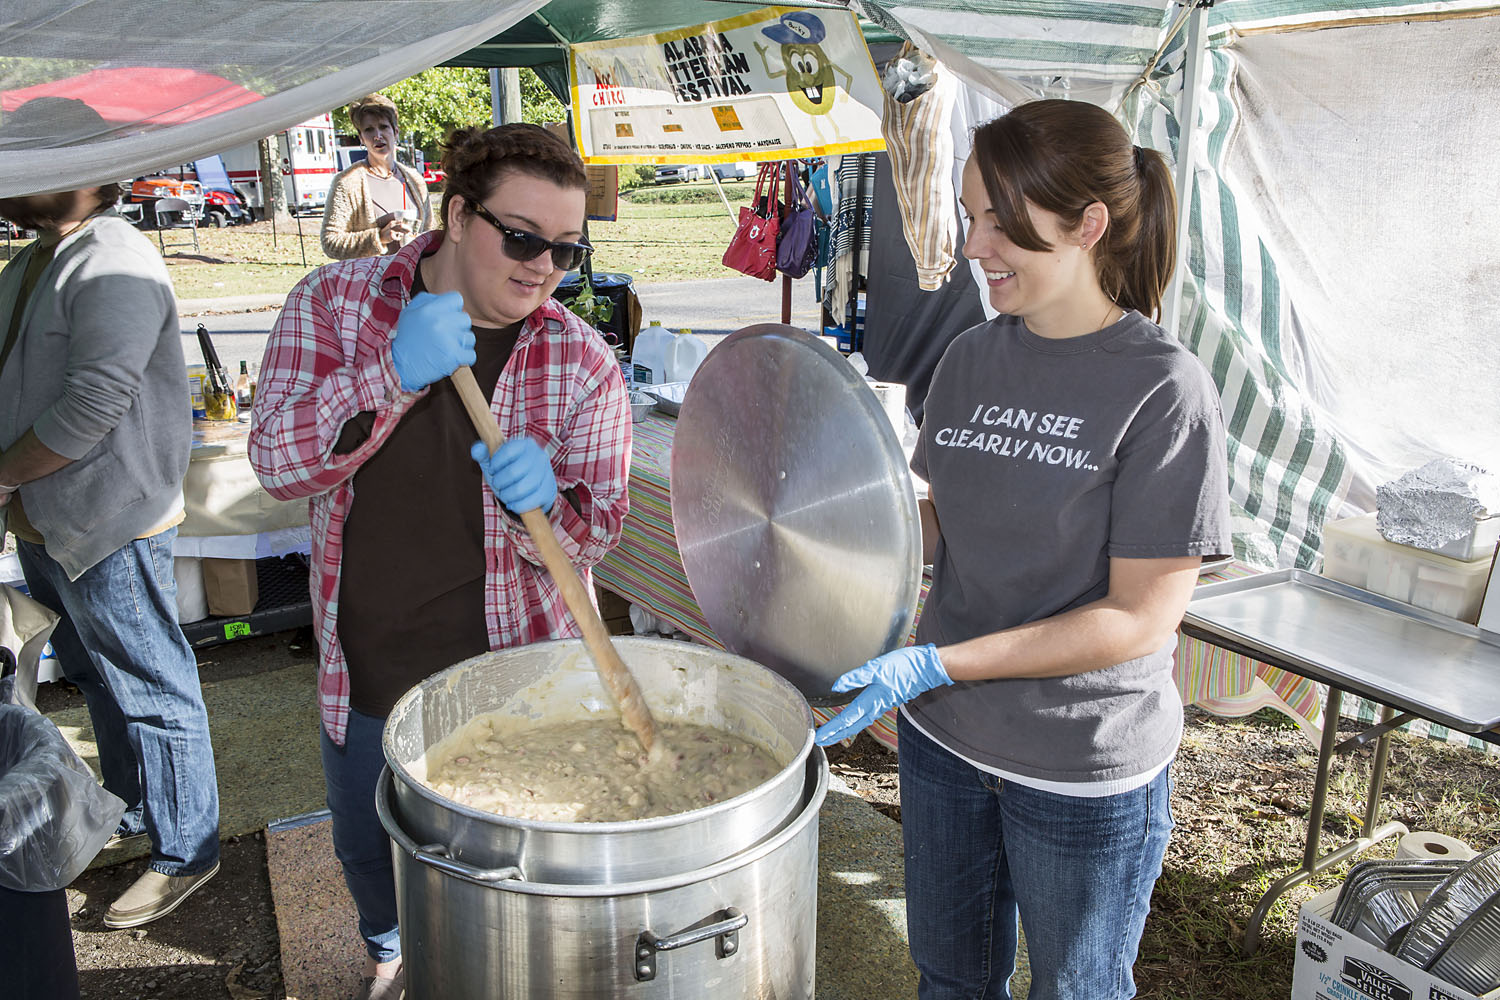 Annual Butterbean Festival on tap Oct 2-3